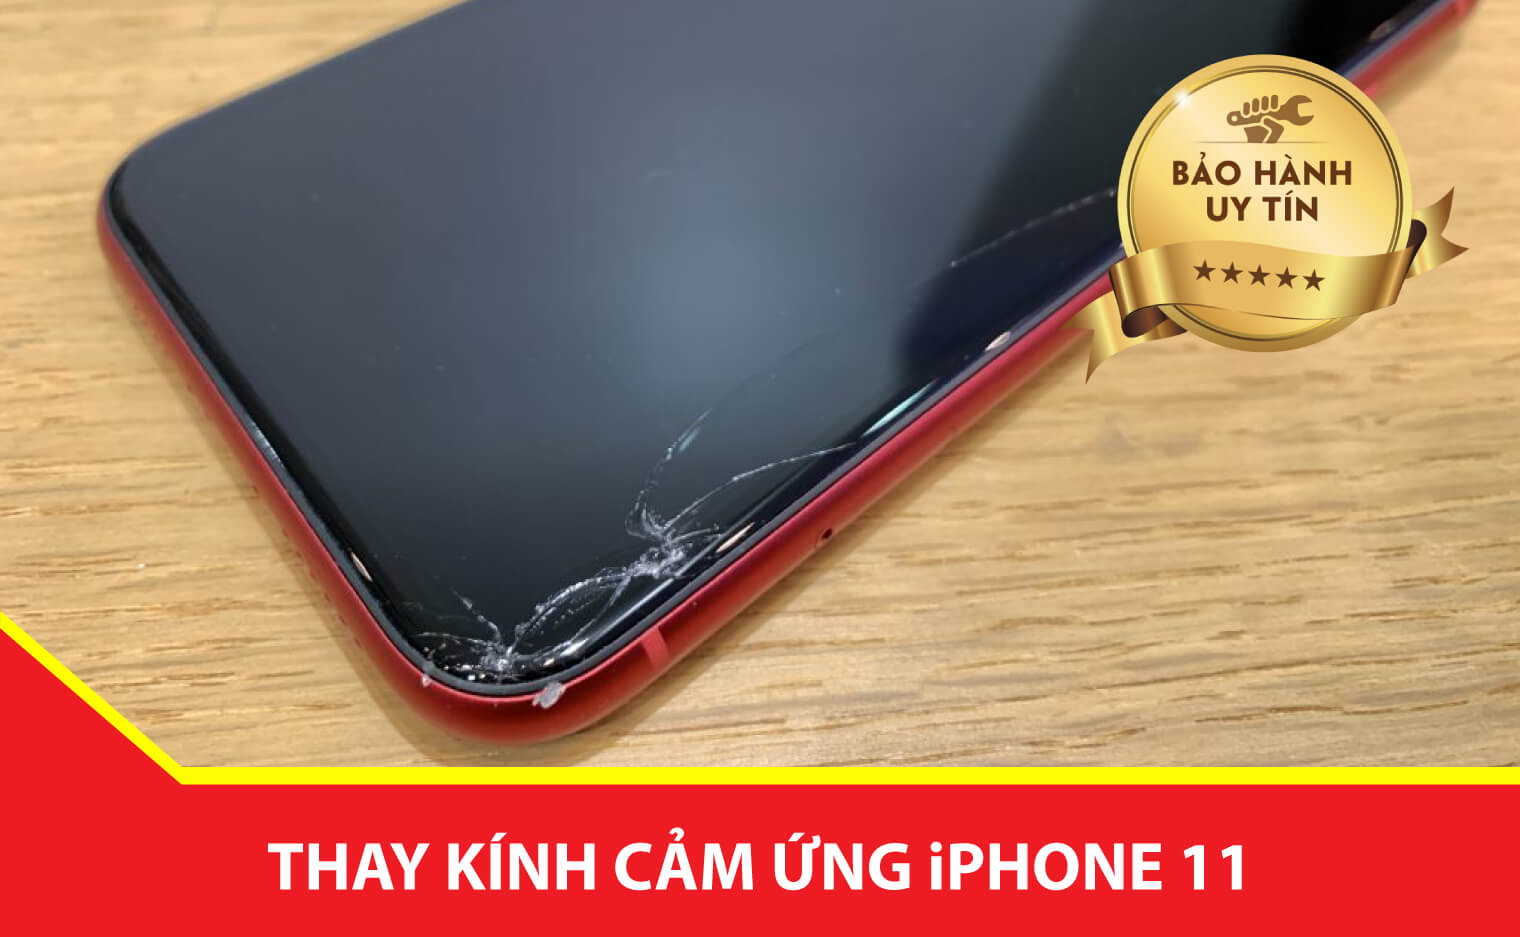 thay kinh cam ung iphone 11